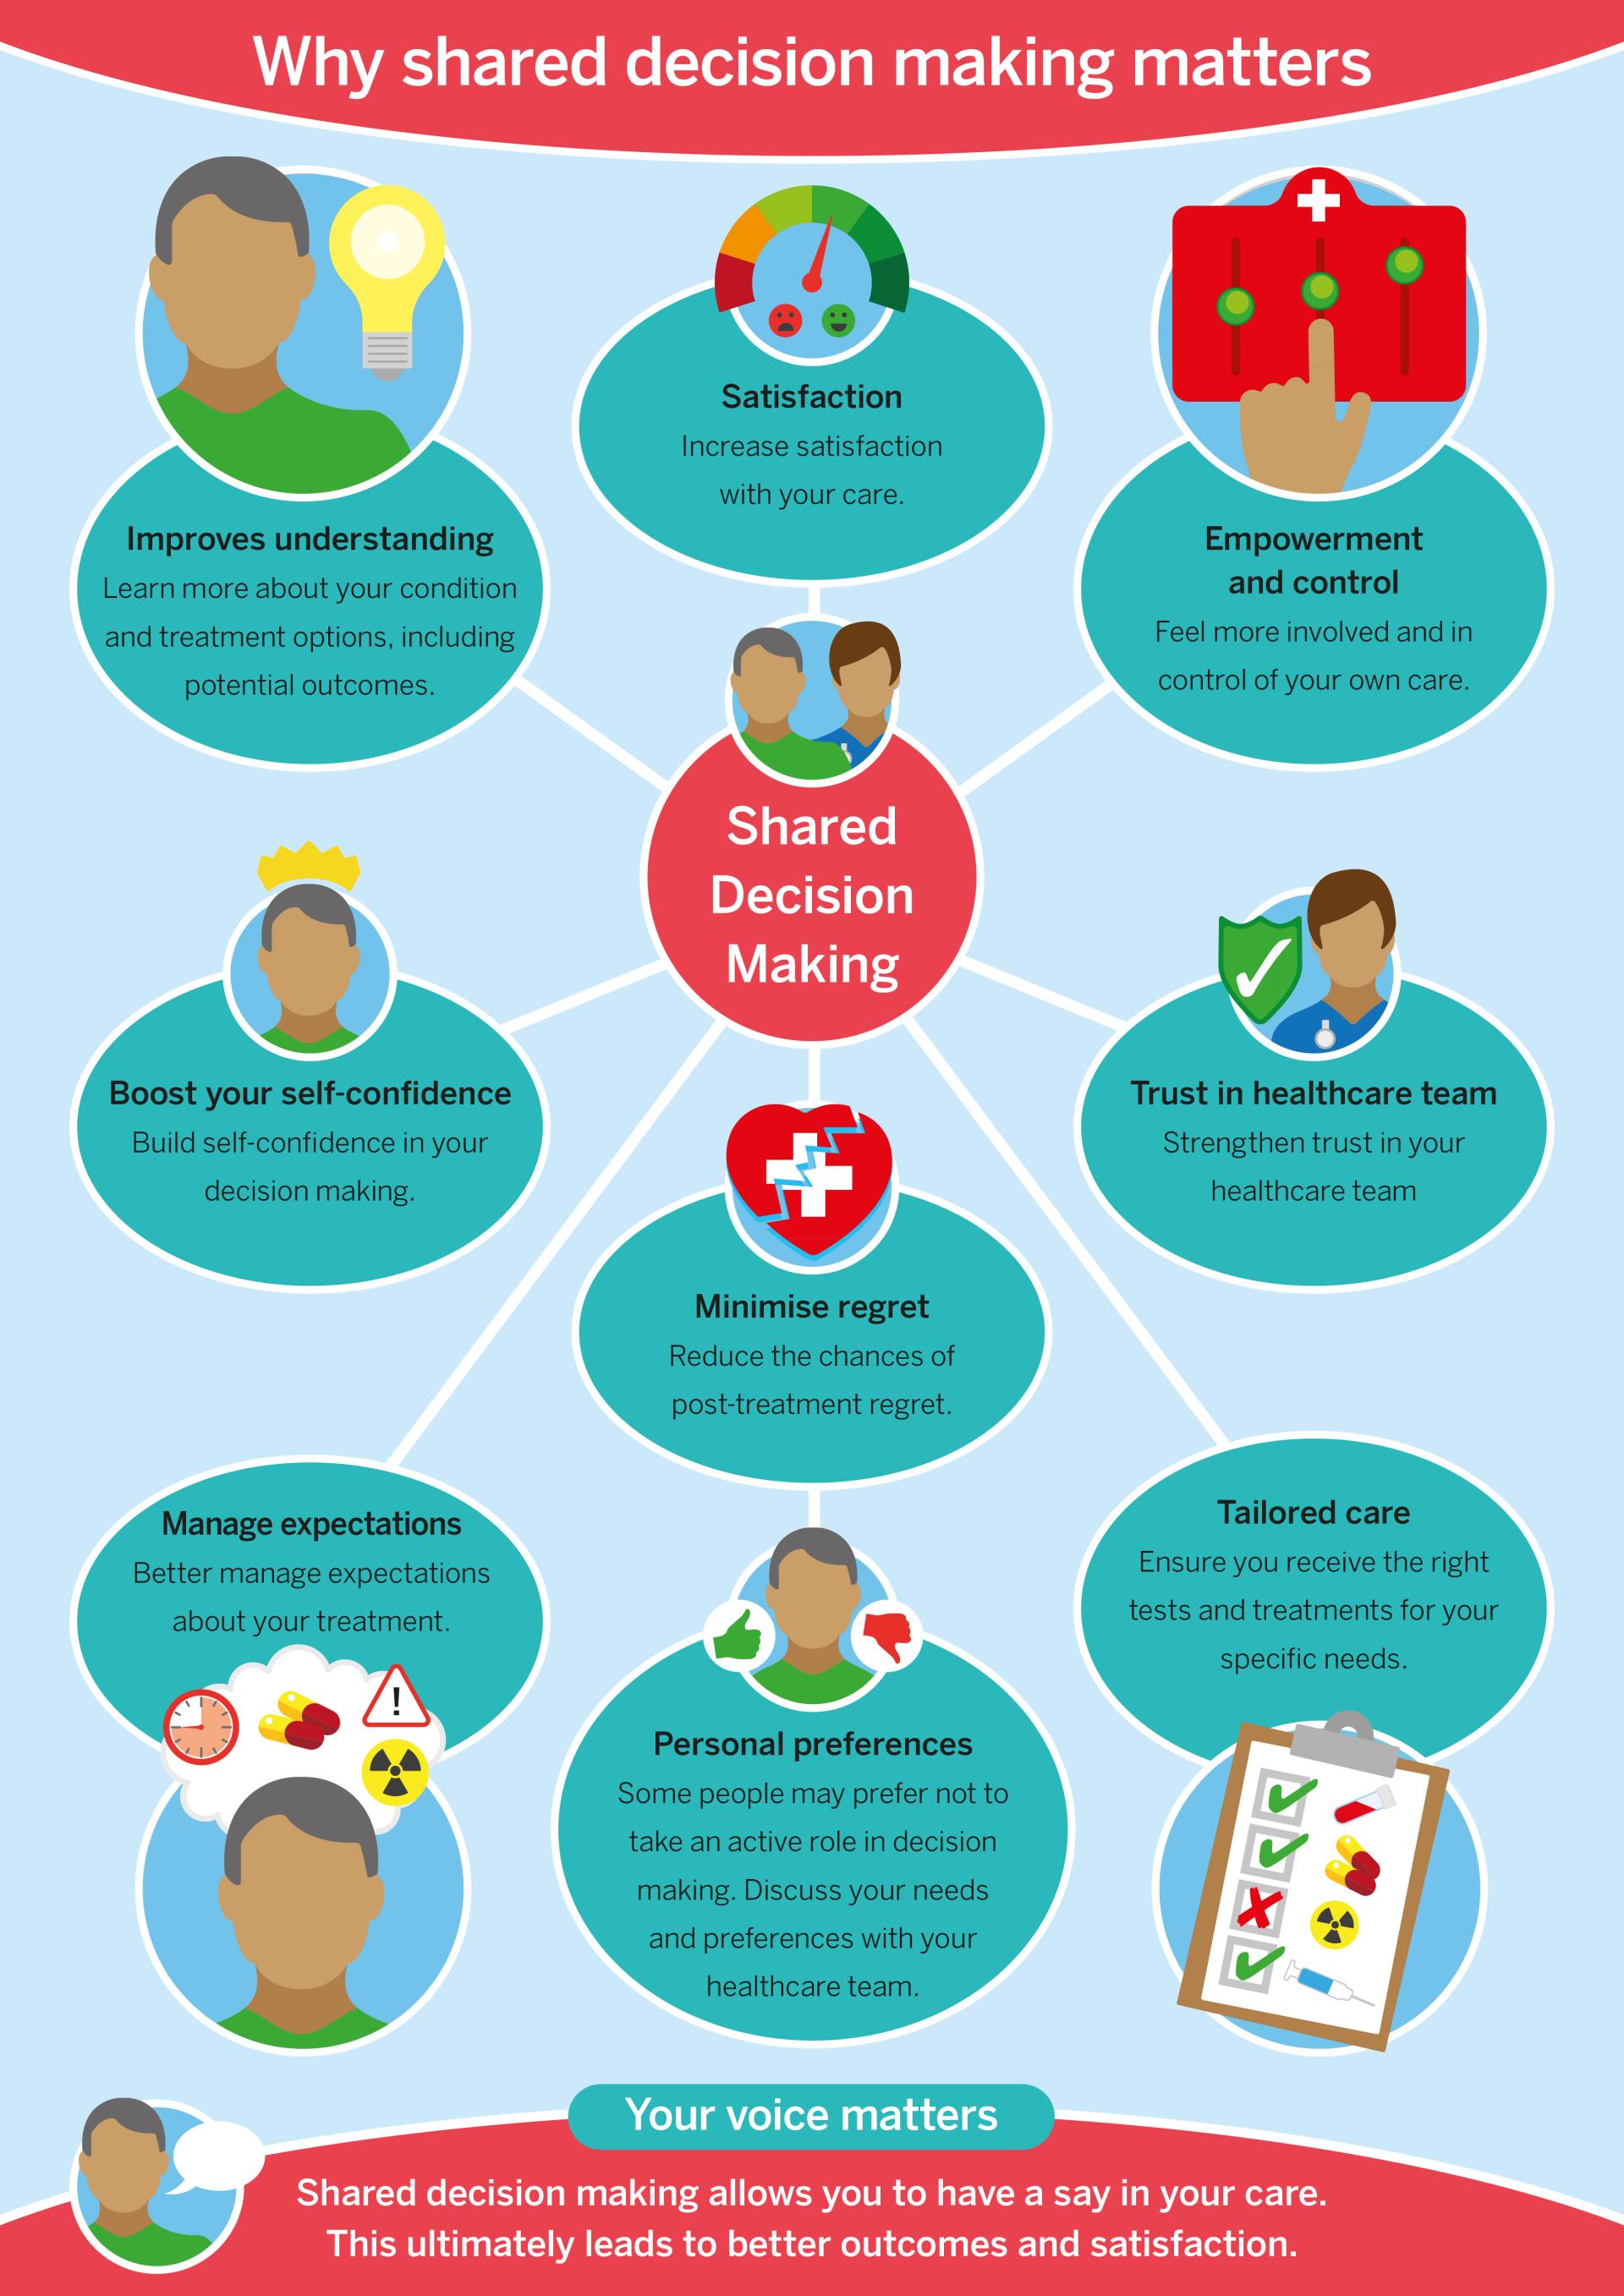 Why shared decison making matters infographic